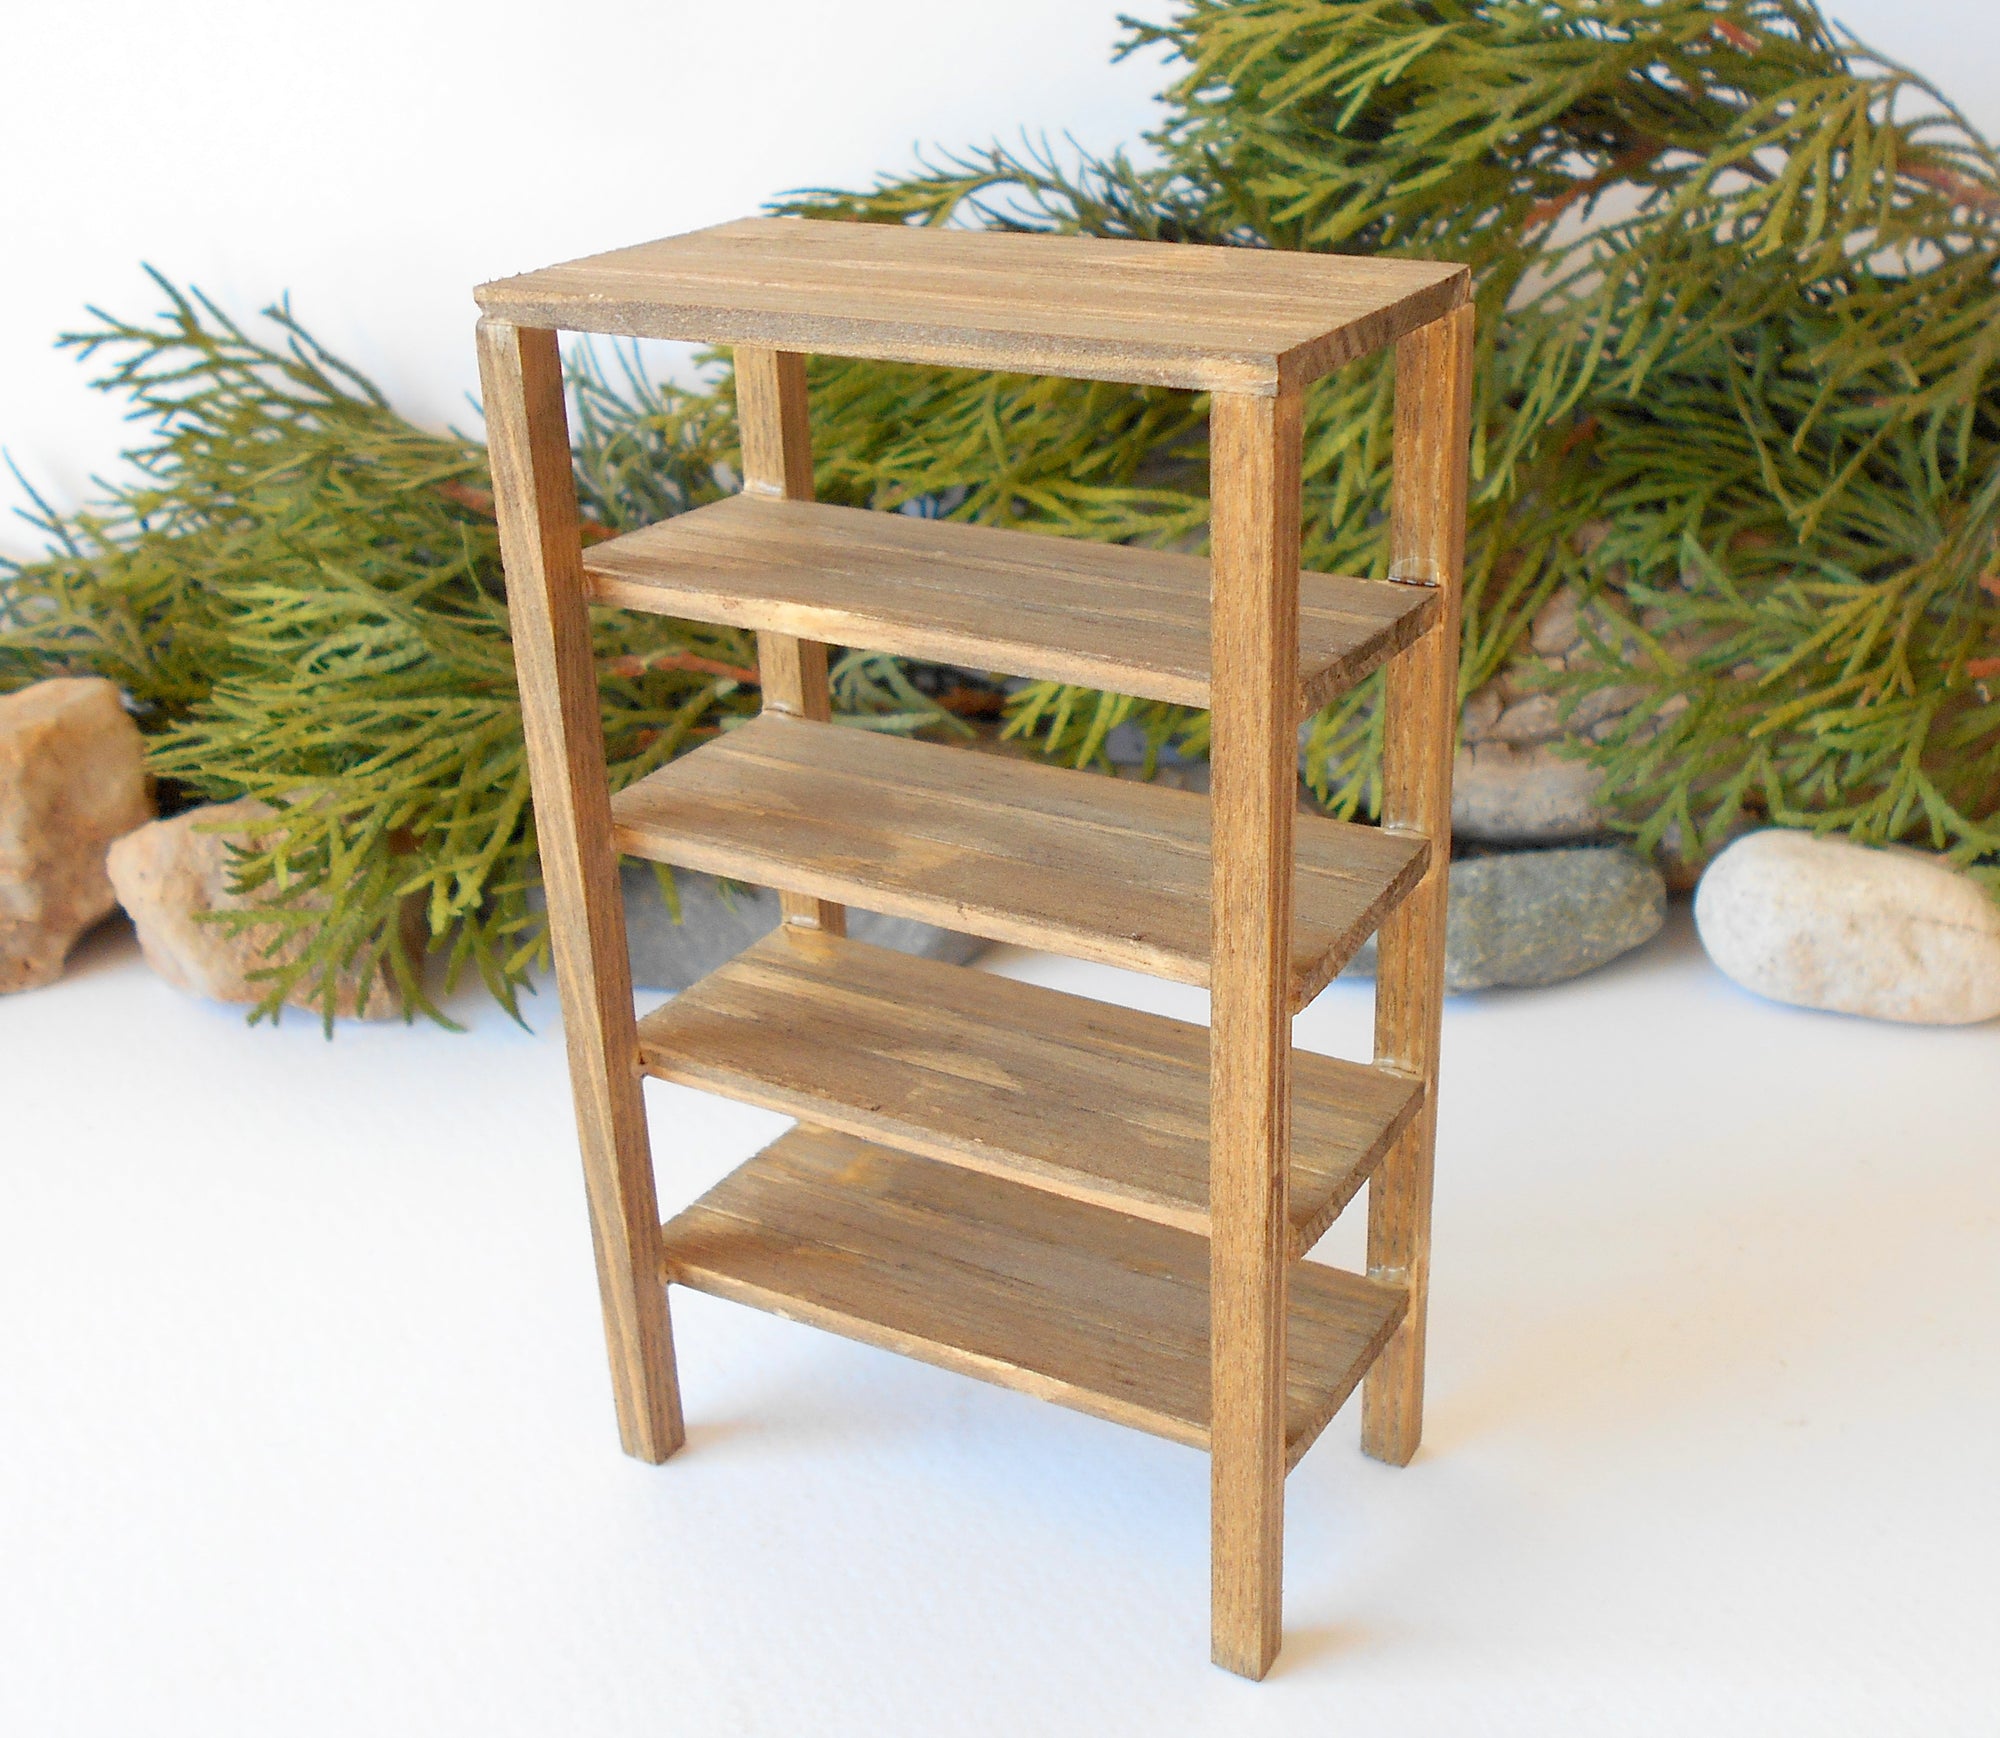 This is a Miniature shelf of wooden furniture that is approximately 1/12 in scale<strong>. </strong>I have stained the shelf with light brown Italian eco-friendly mordant.&nbsp;